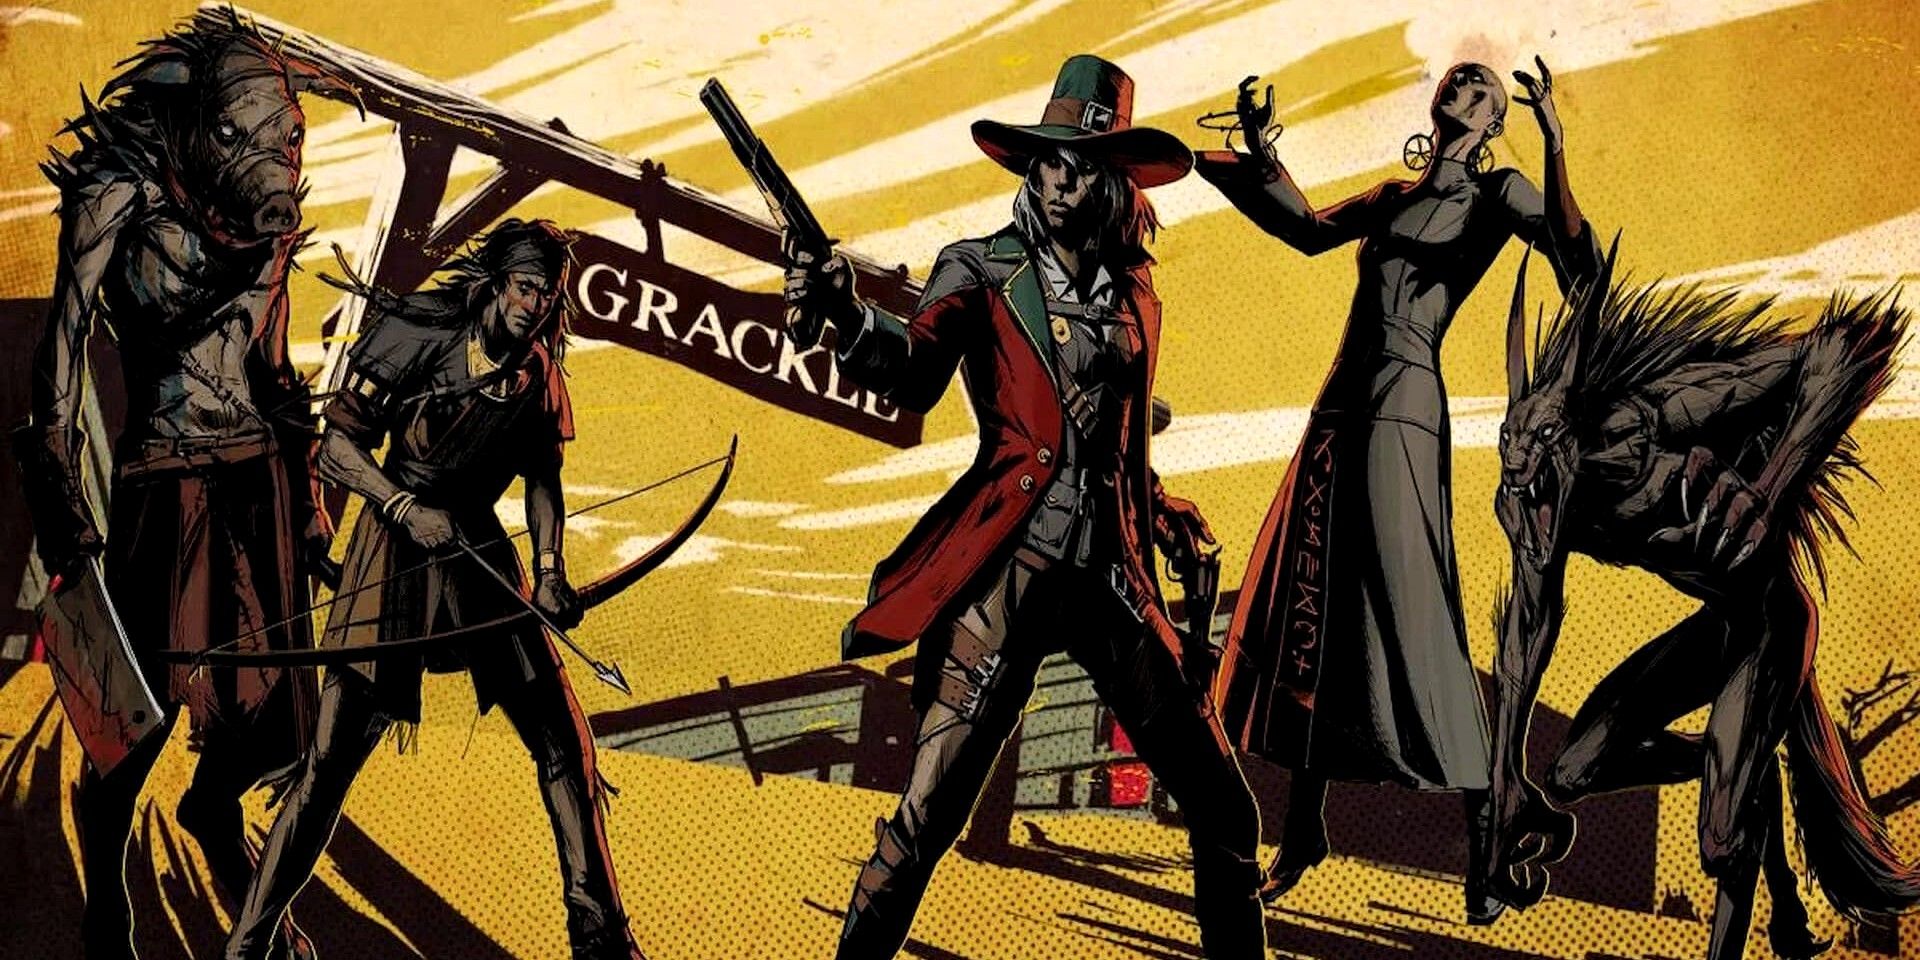 Promotional image for Weird West, featuring Jane Bell and several other characters.